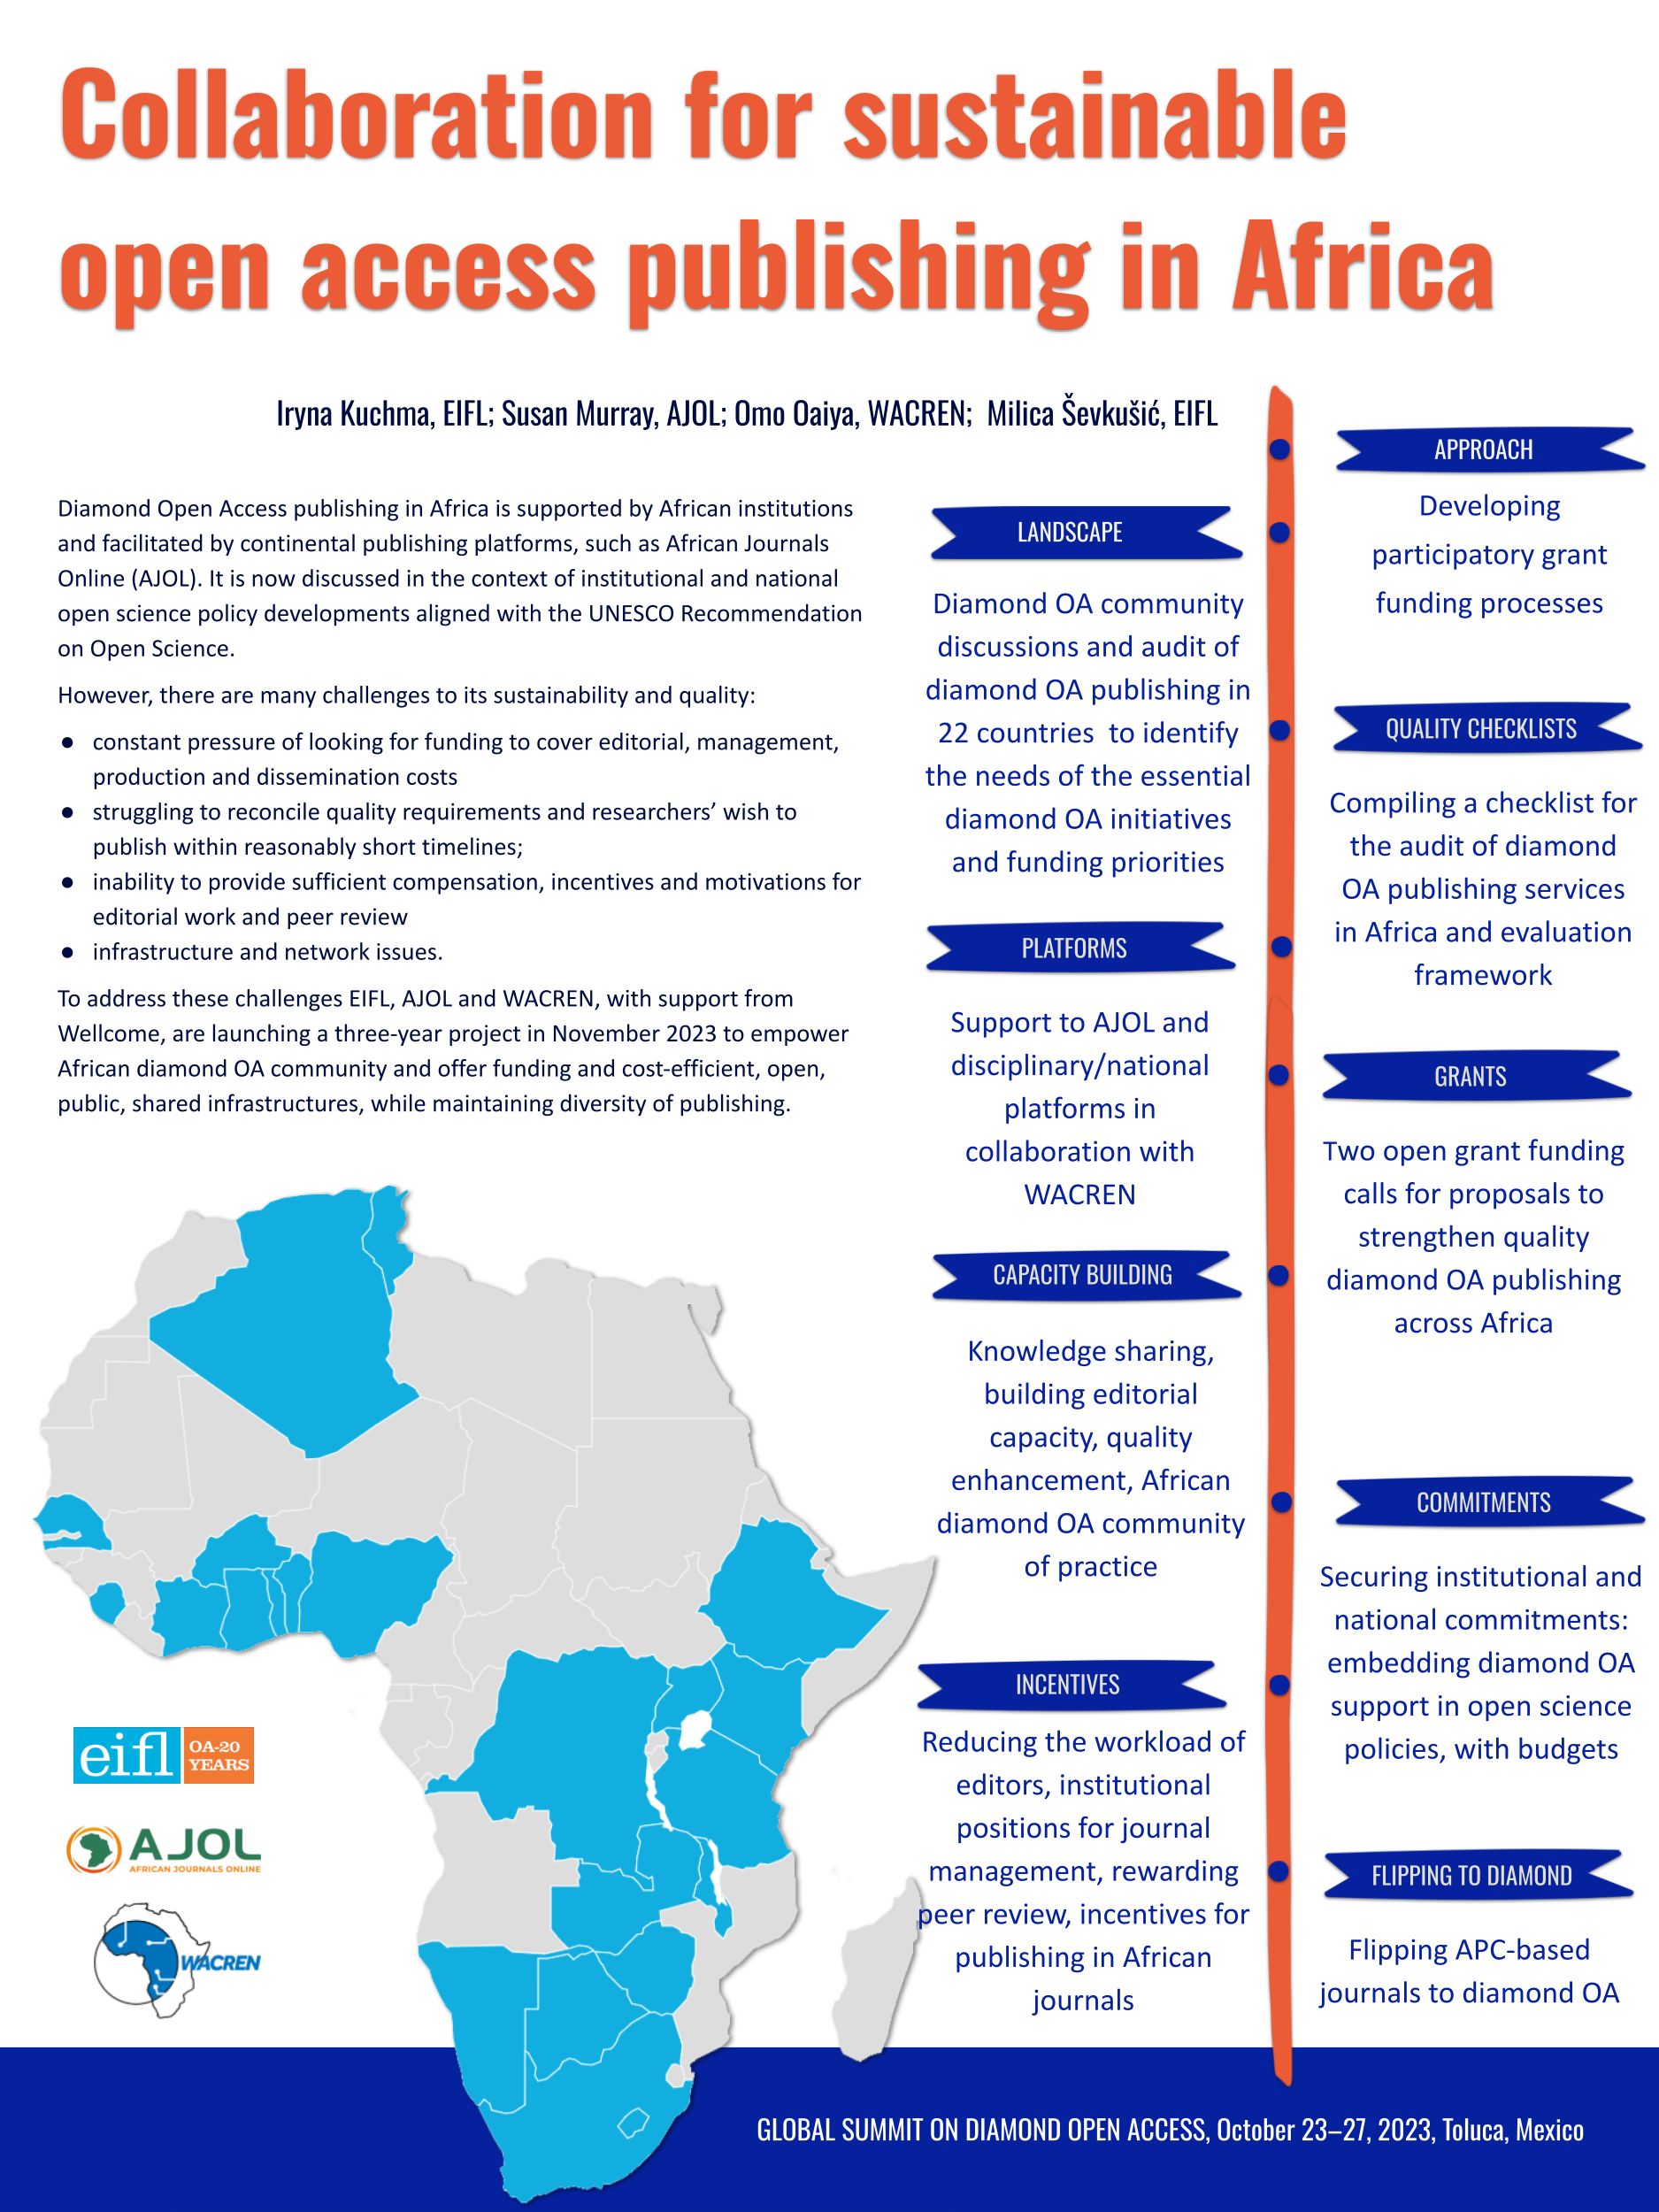 Afiche que presenta 'Collaboration for Sustainable Open Access Publishing in Africa'